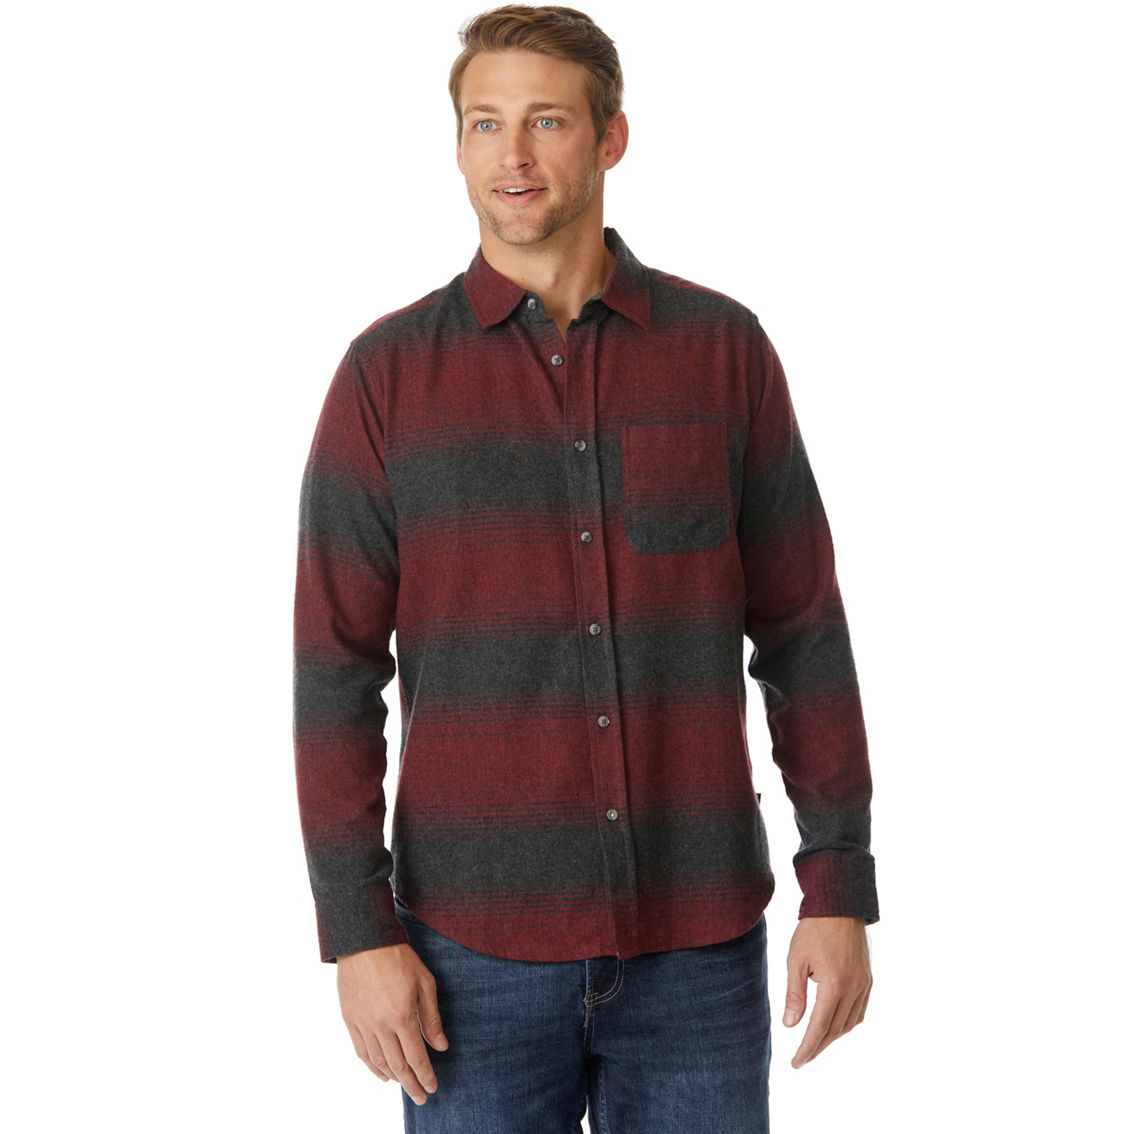 Ocean Current Nuclear Stripe Flannel Shirt - Image 3 of 3